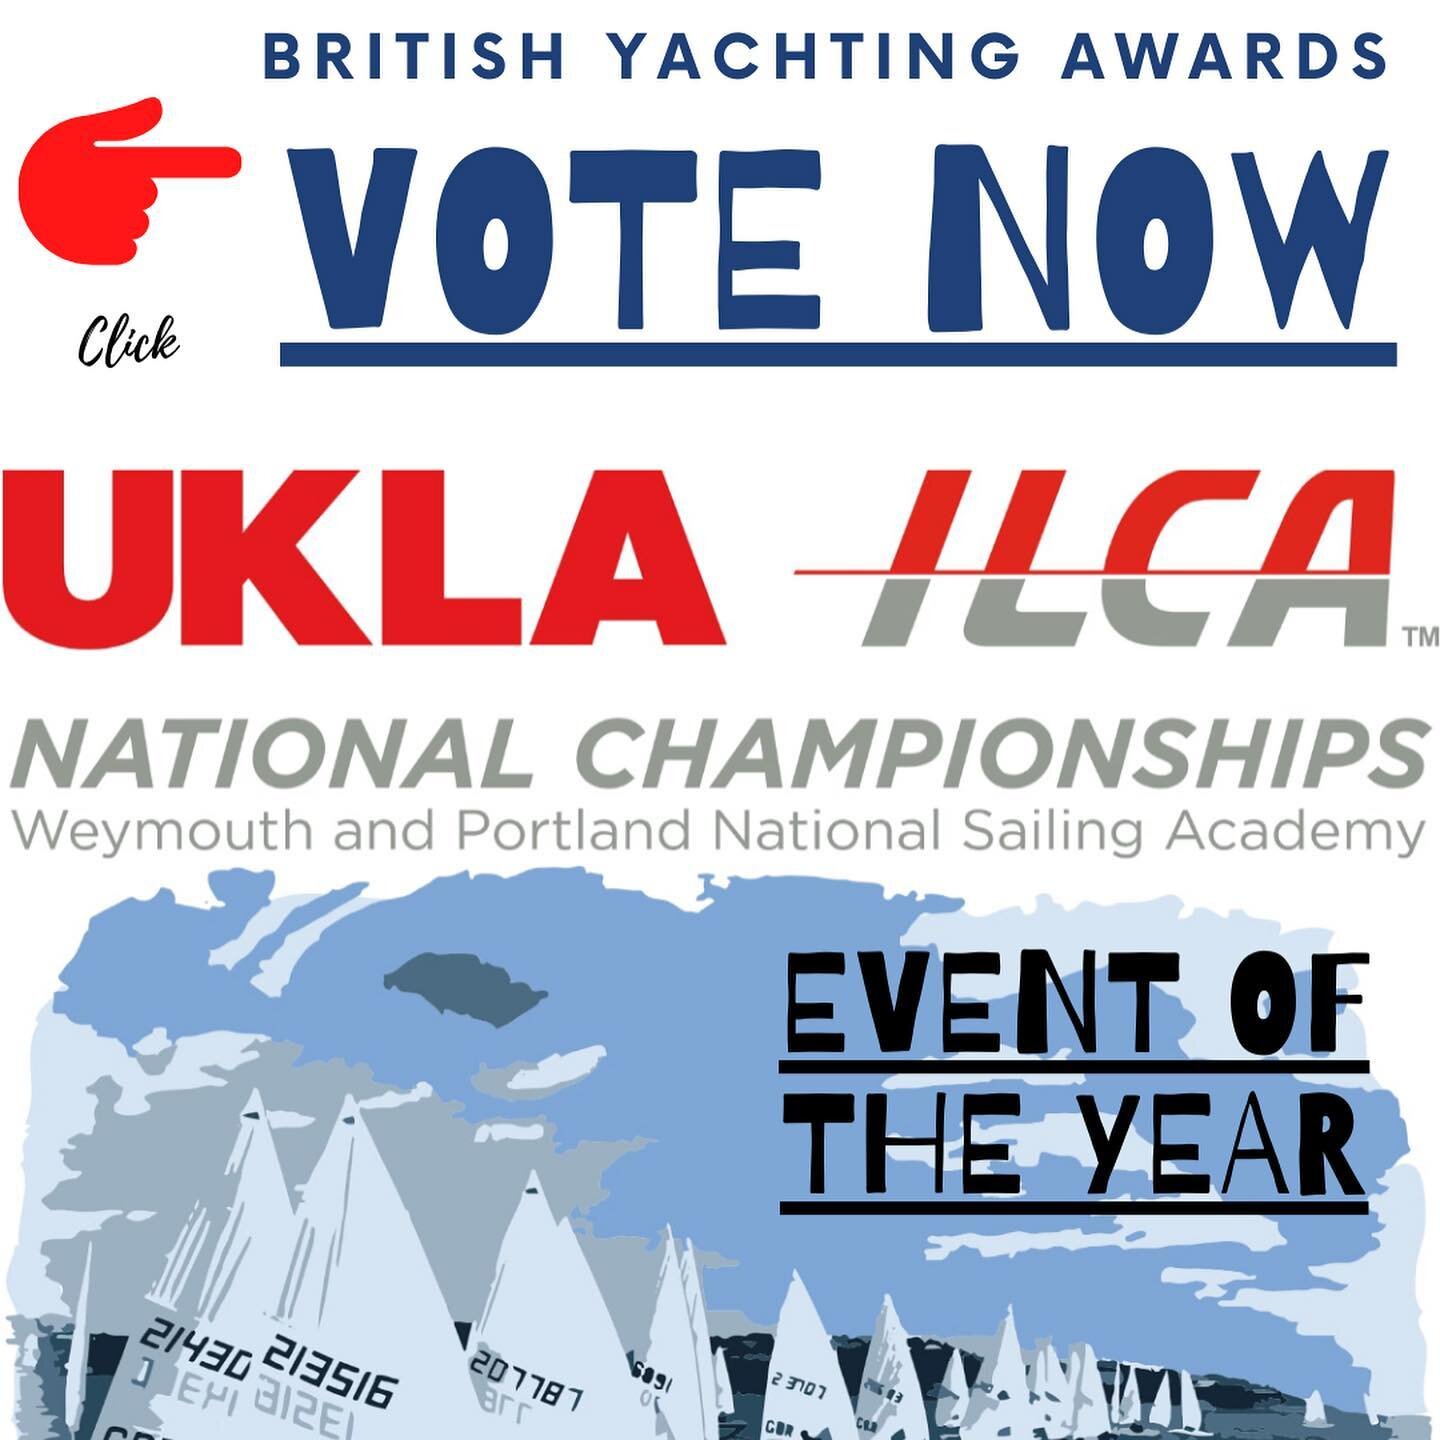 Vote now for the UKLA National Championships event of the year
https://www.britishyachtingawards.com/vote-now/